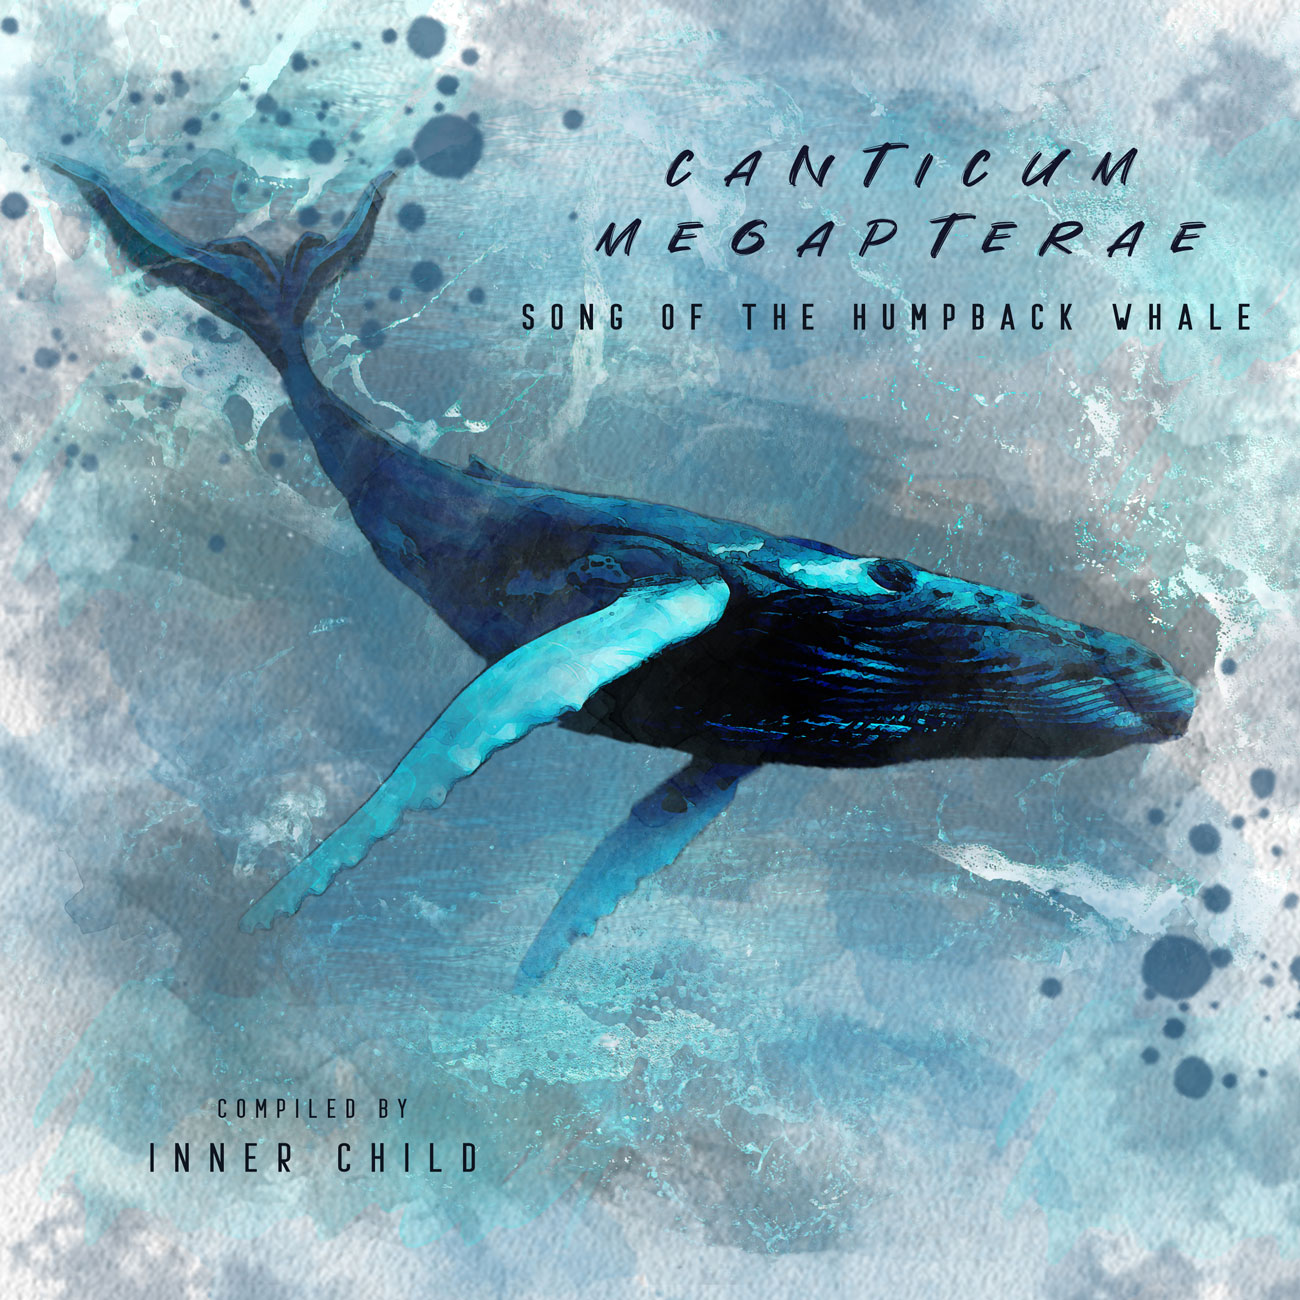 Song cover graphic of Sara Niksic's first album, "Canticum Megapterae". The cover is done in a water color style with a light gray blue background and a bright blue/aquamarine-colored humpback whale gliding through the water in the center